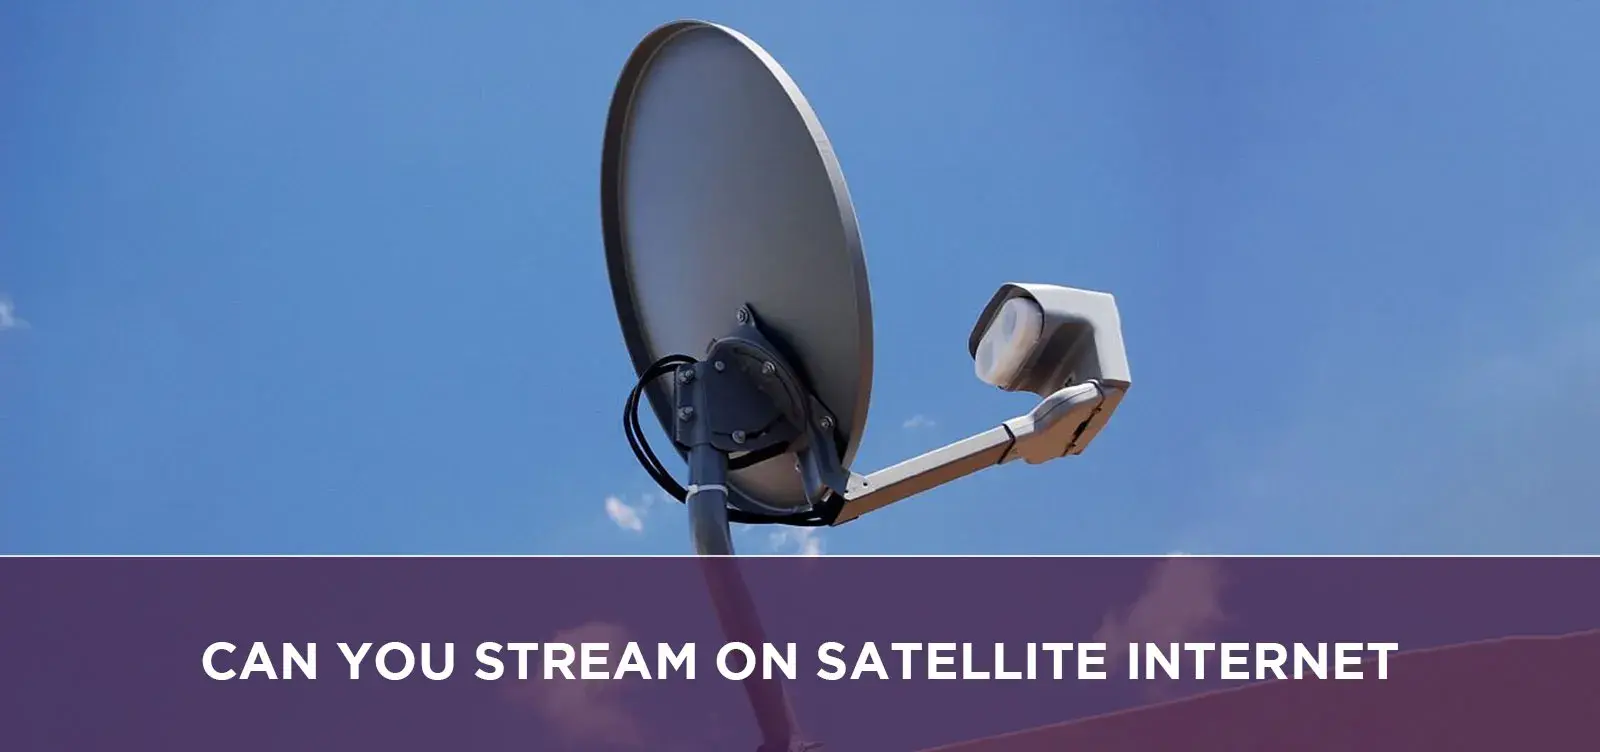 Can You Stream On Satellite Internet?